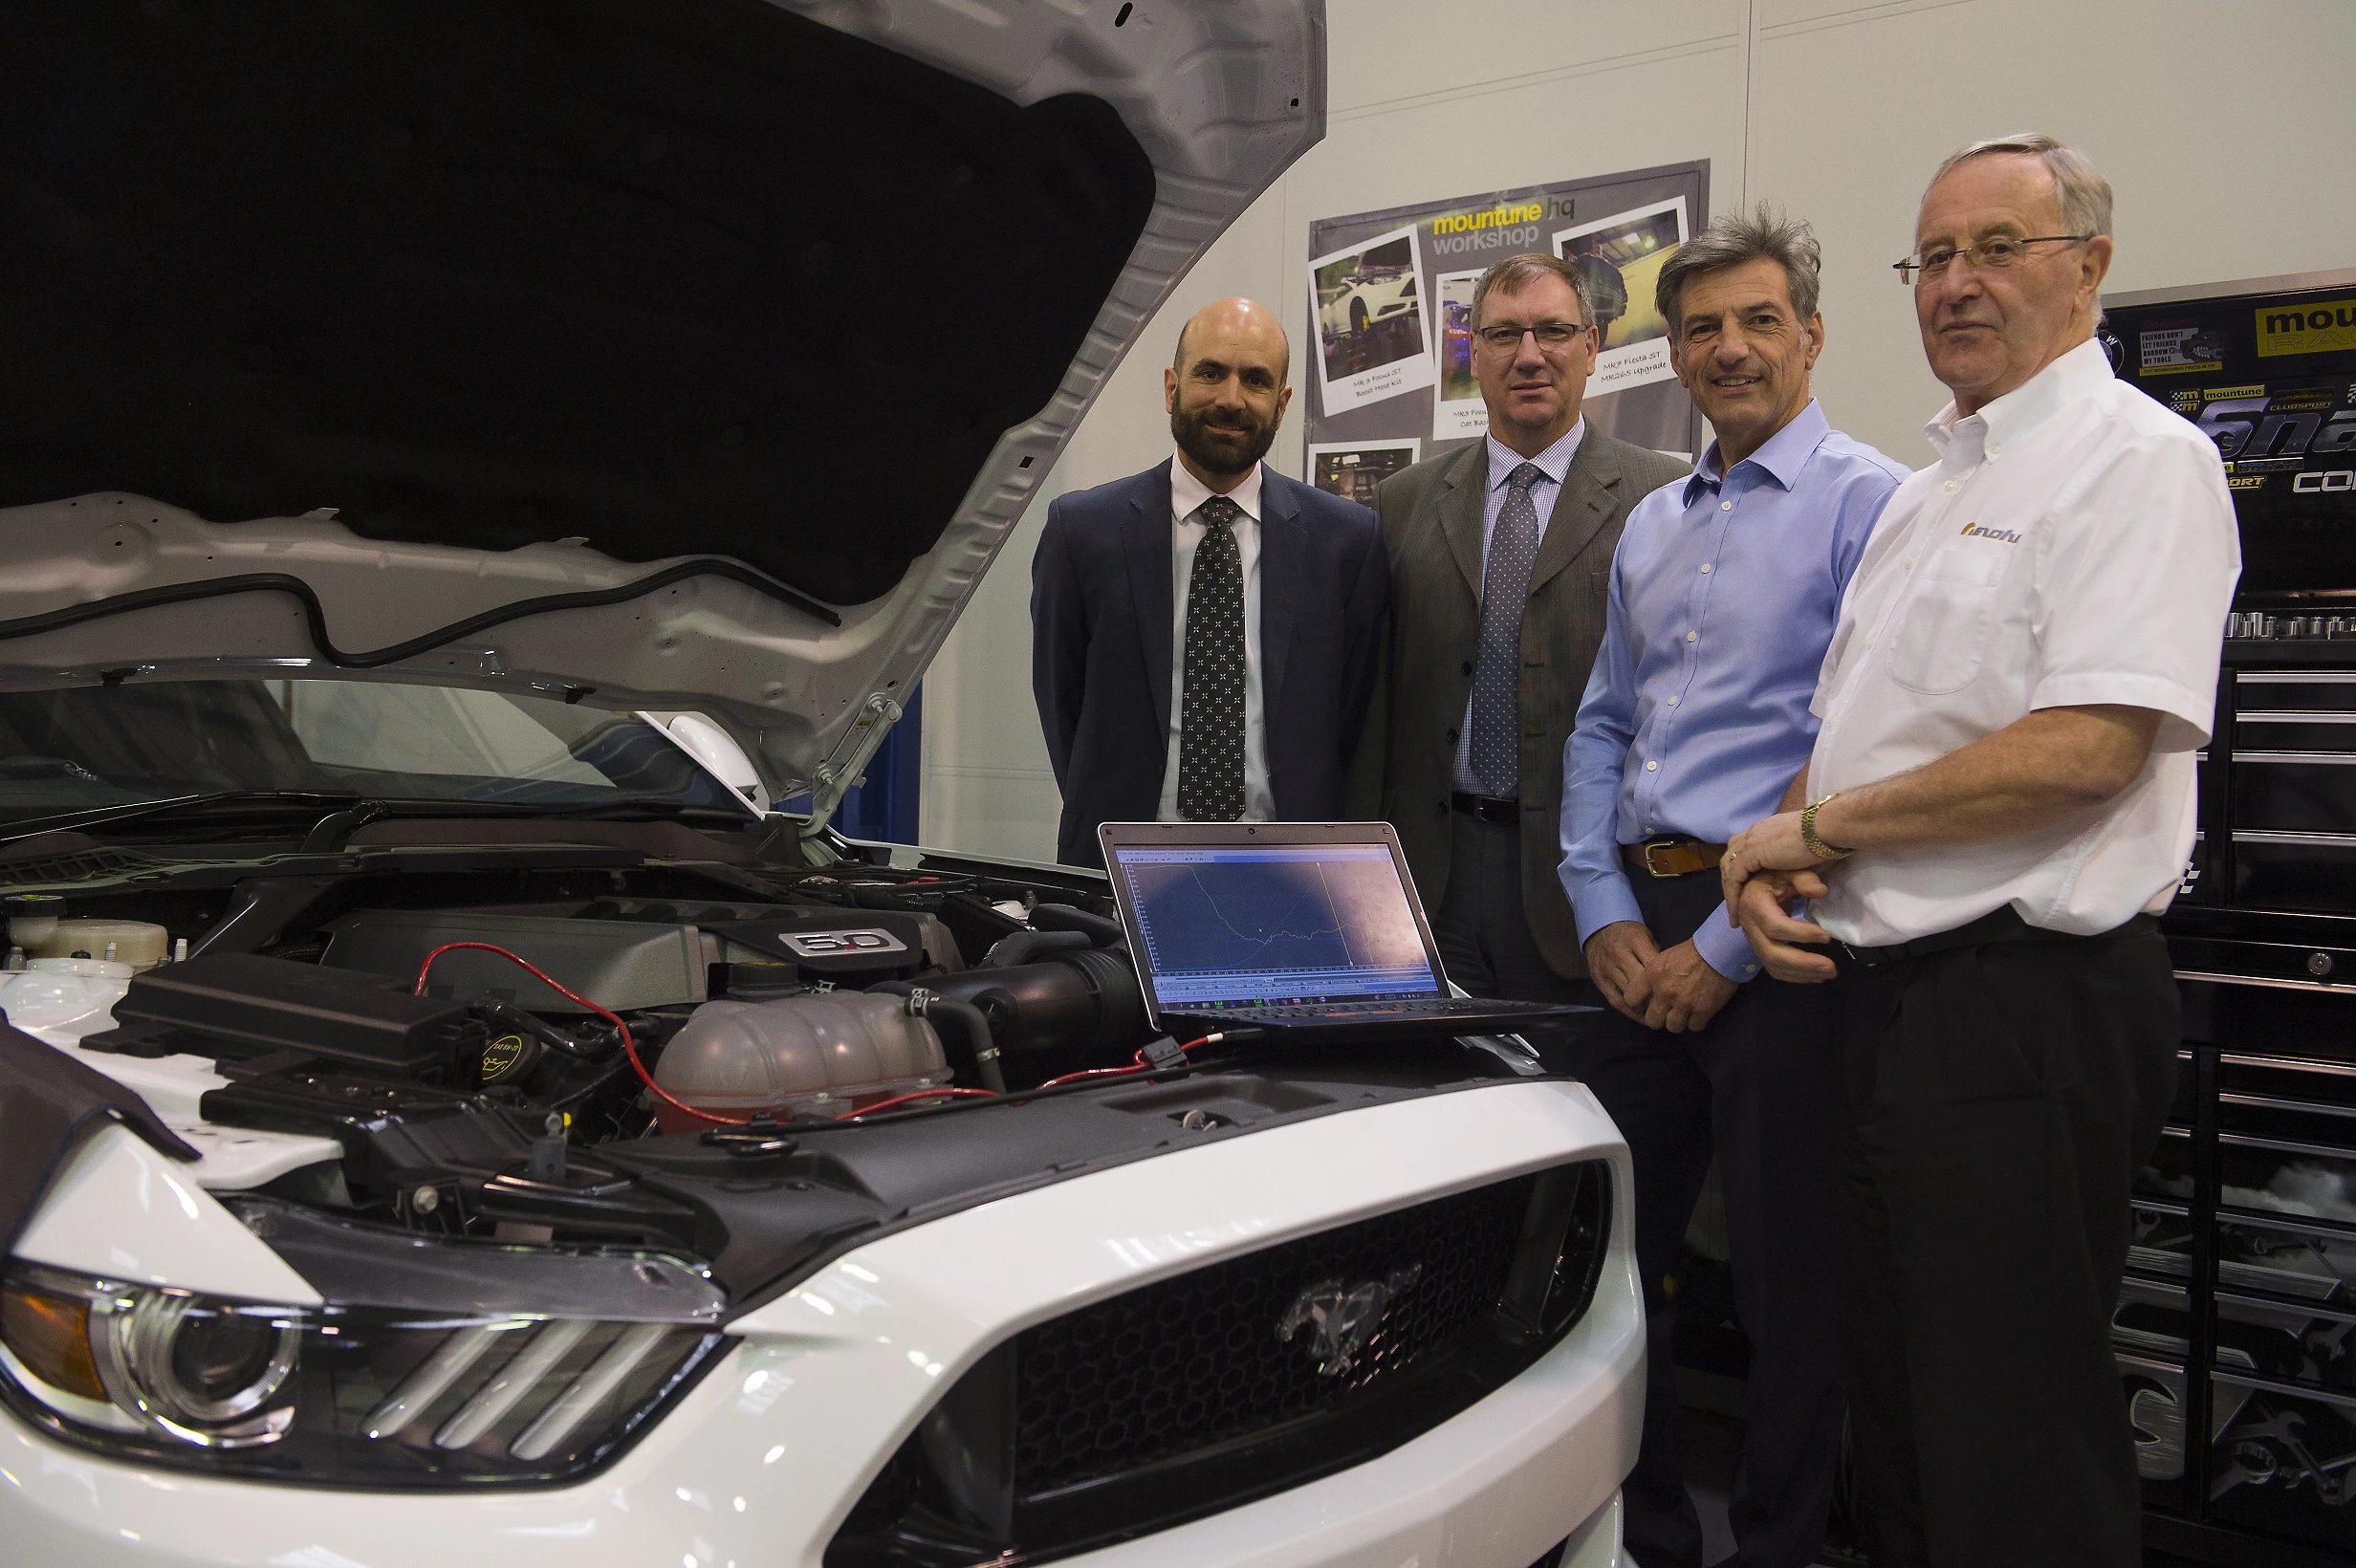 The Revolve and Ford team at Revolve Technologies